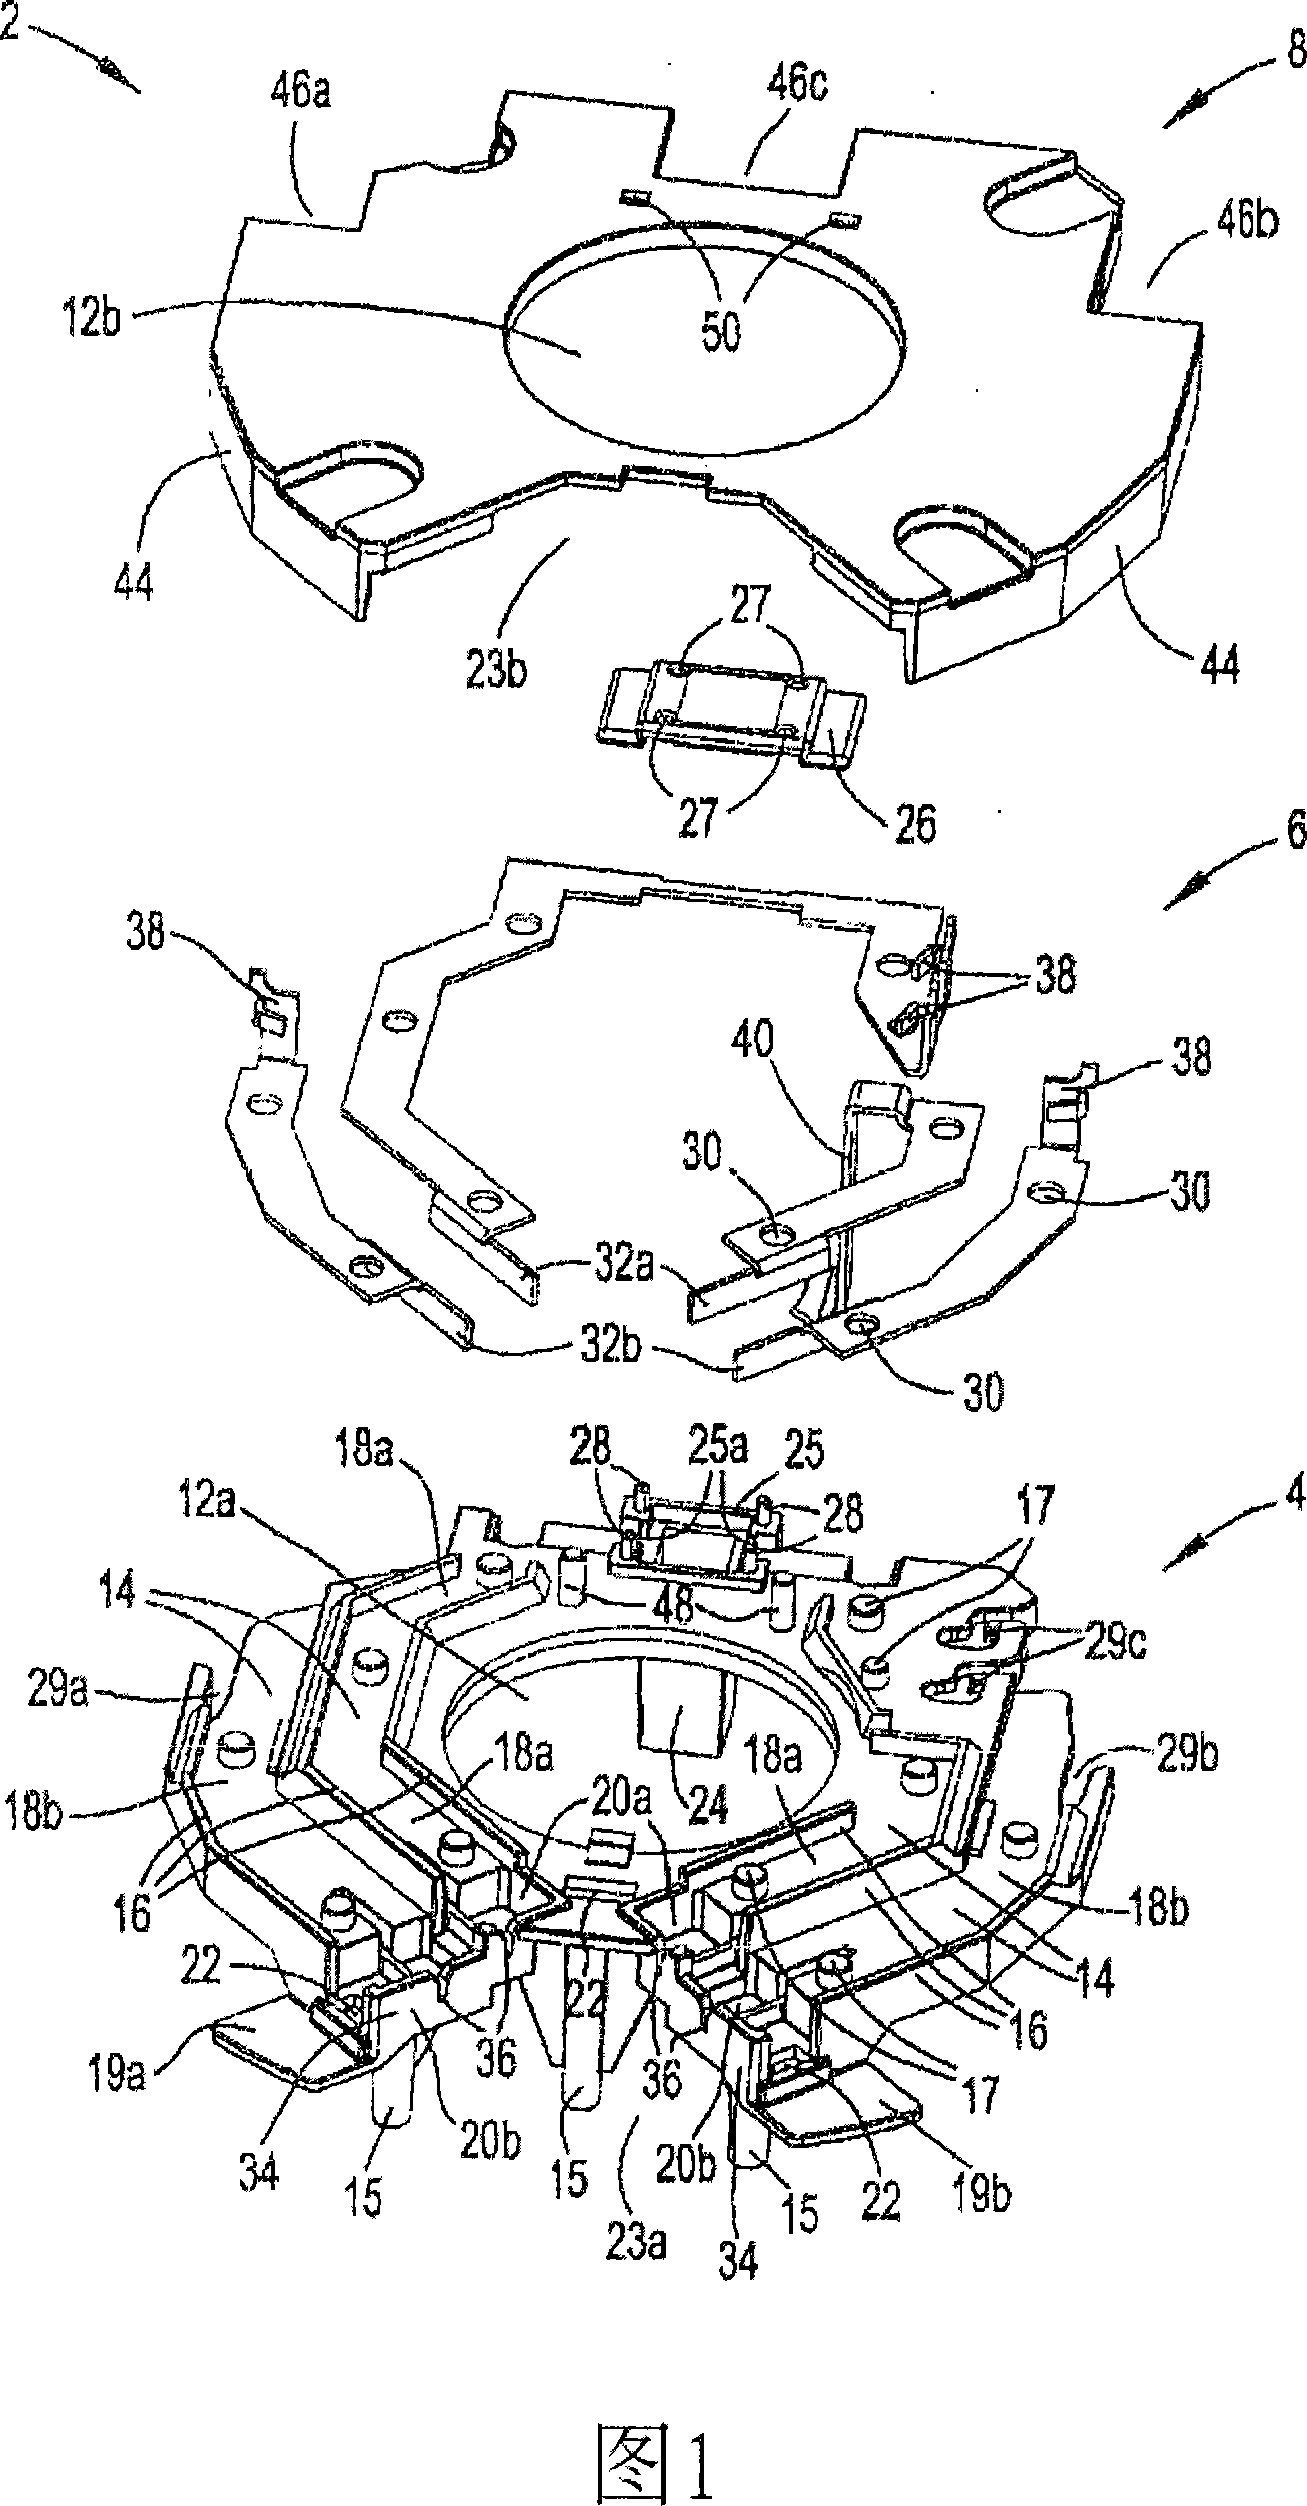 Connecting device for an electric motor